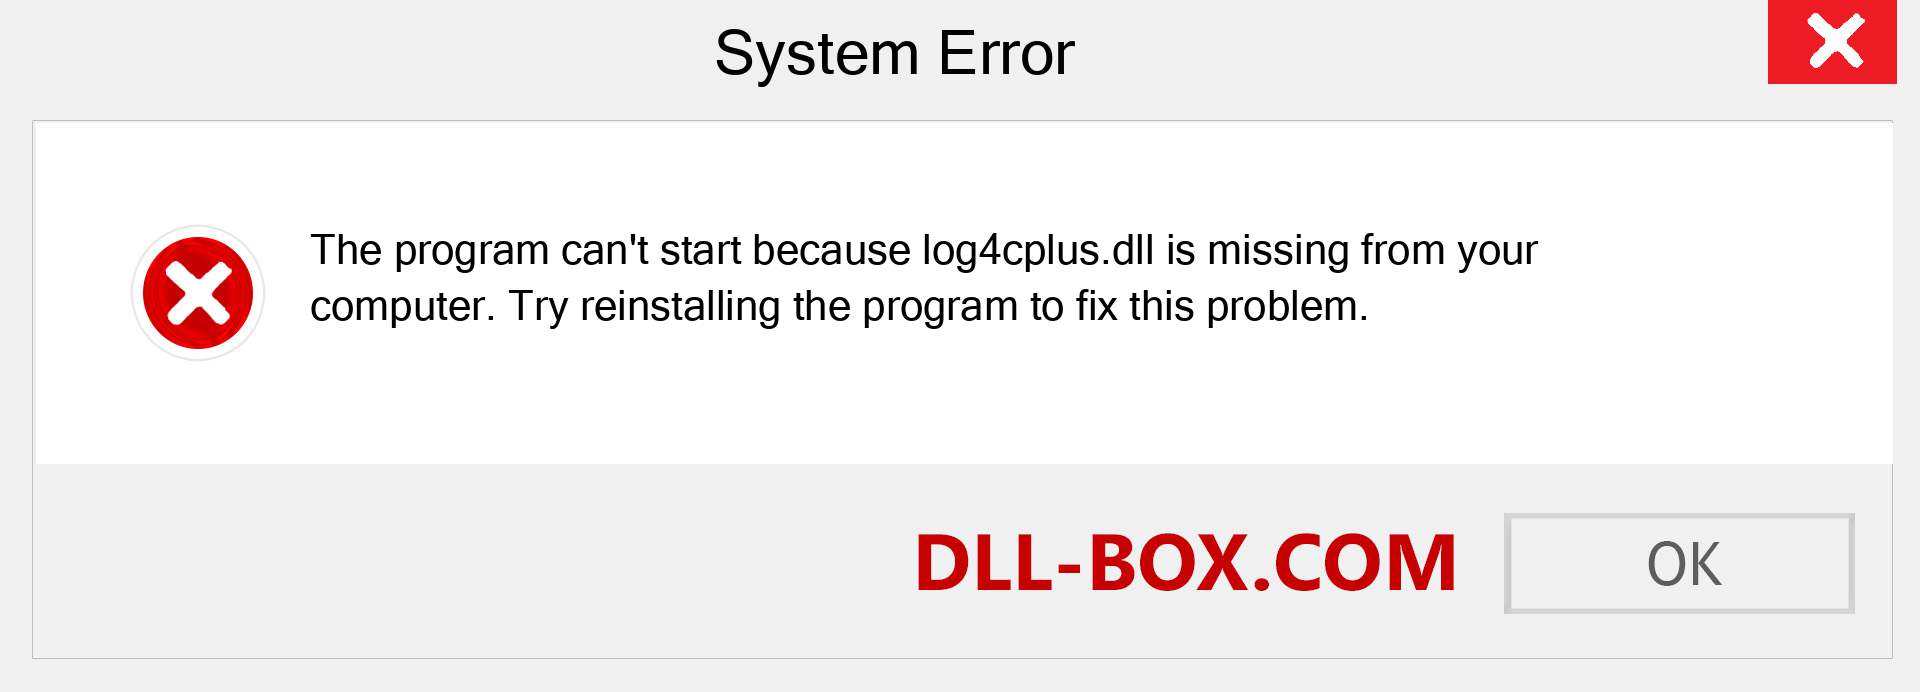  log4cplus.dll file is missing?. Download for Windows 7, 8, 10 - Fix  log4cplus dll Missing Error on Windows, photos, images